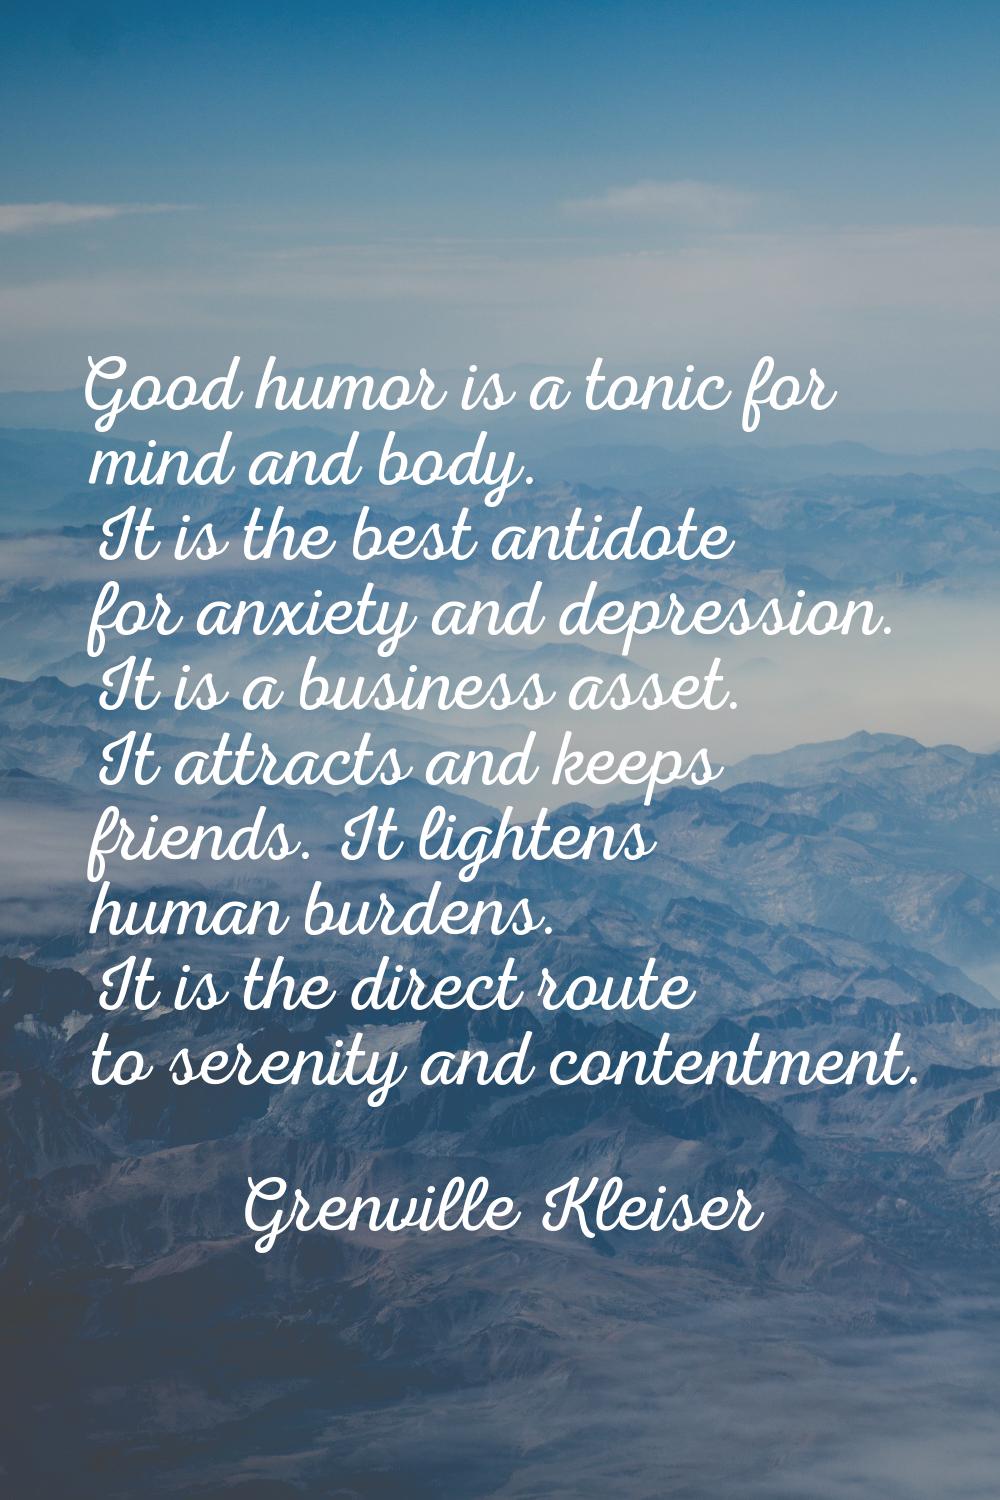 Good humor is a tonic for mind and body. It is the best antidote for anxiety and depression. It is 